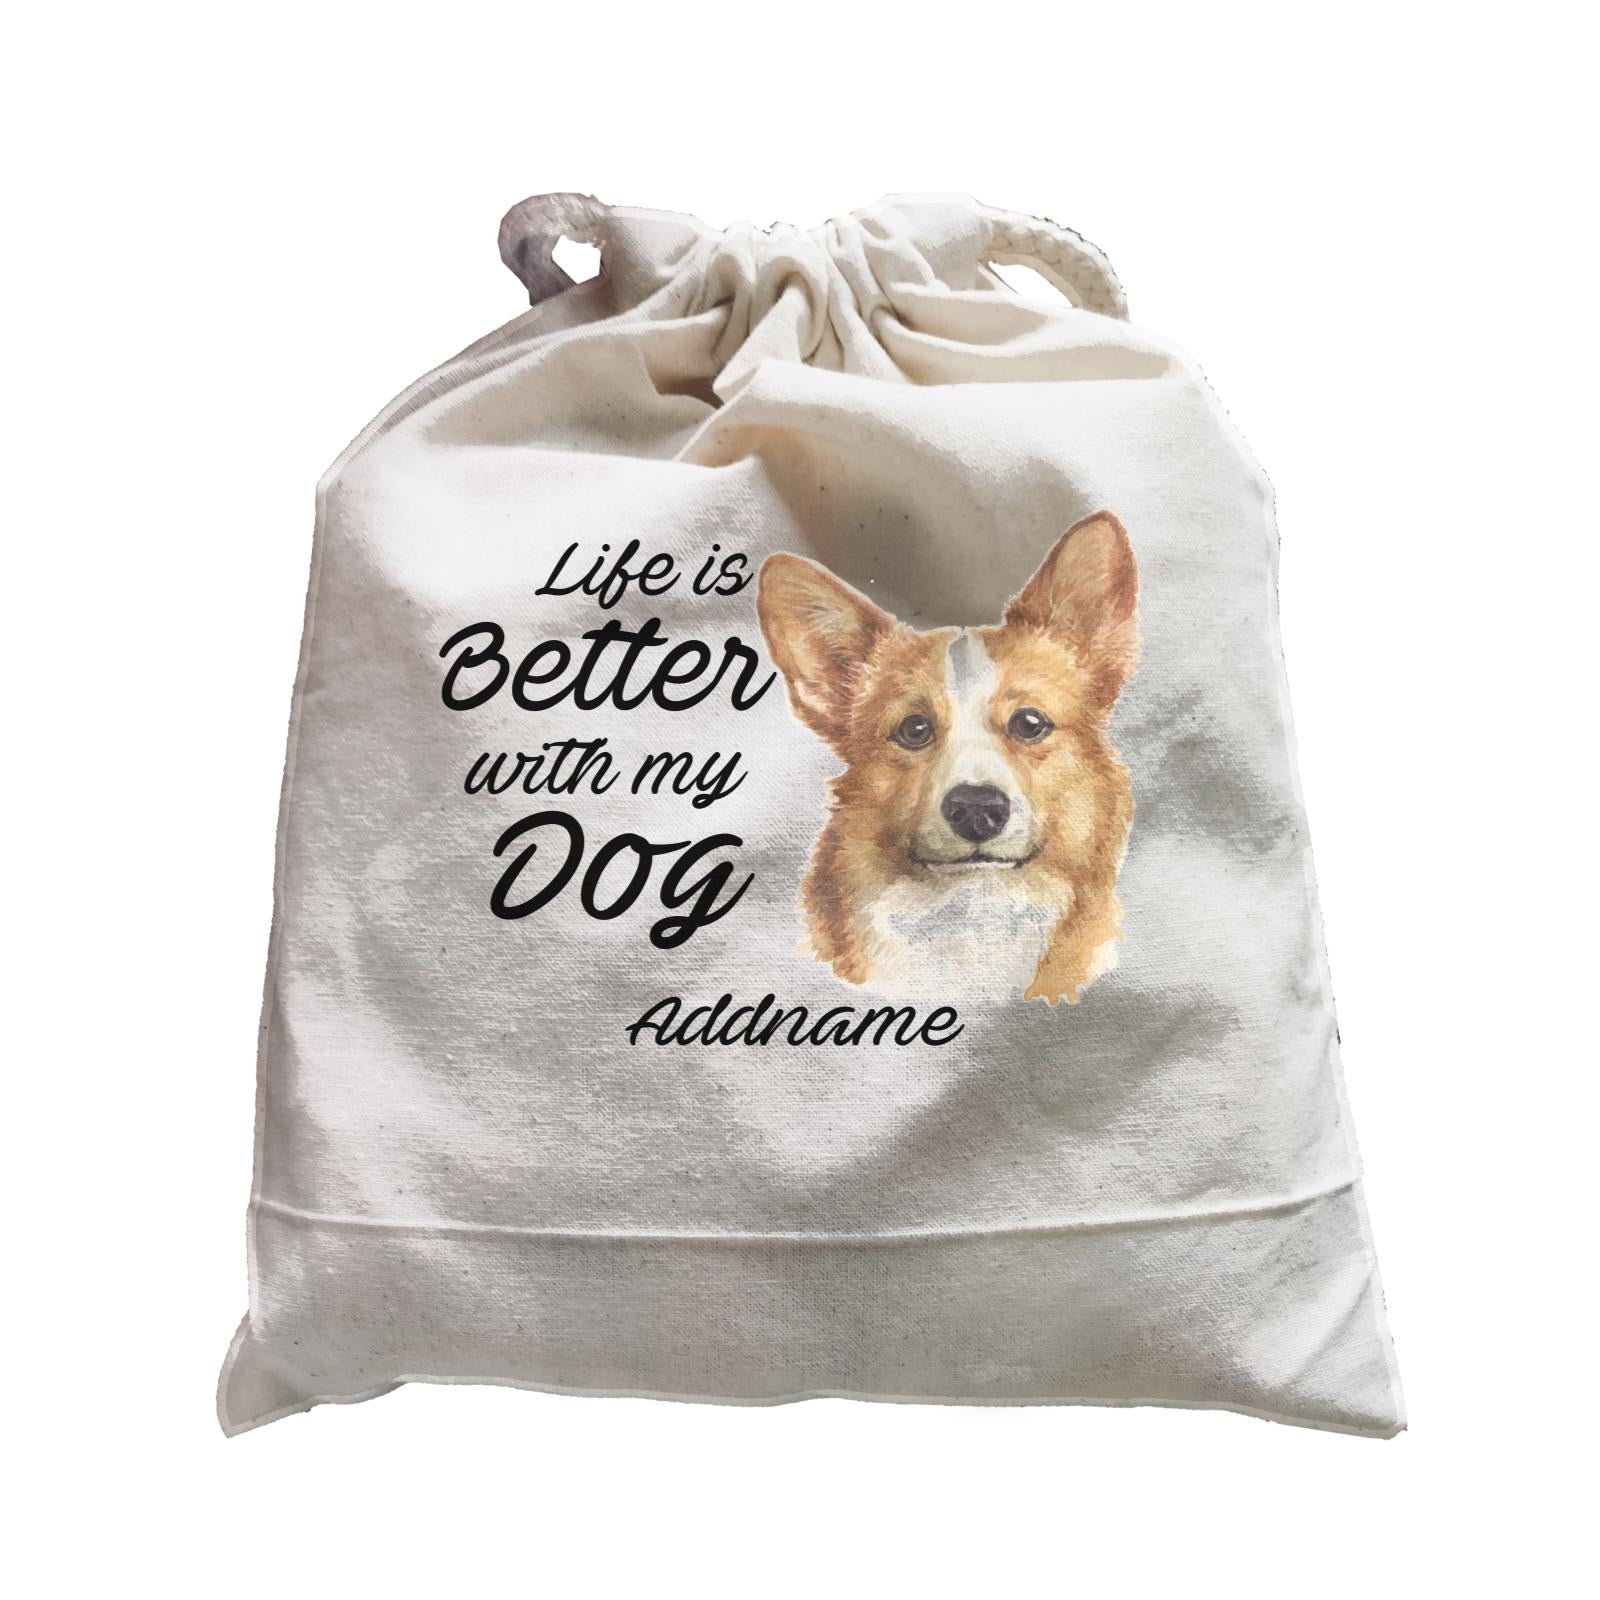 Watercolor Life is Better With My Dog Welsh Corgi Addname Satchel